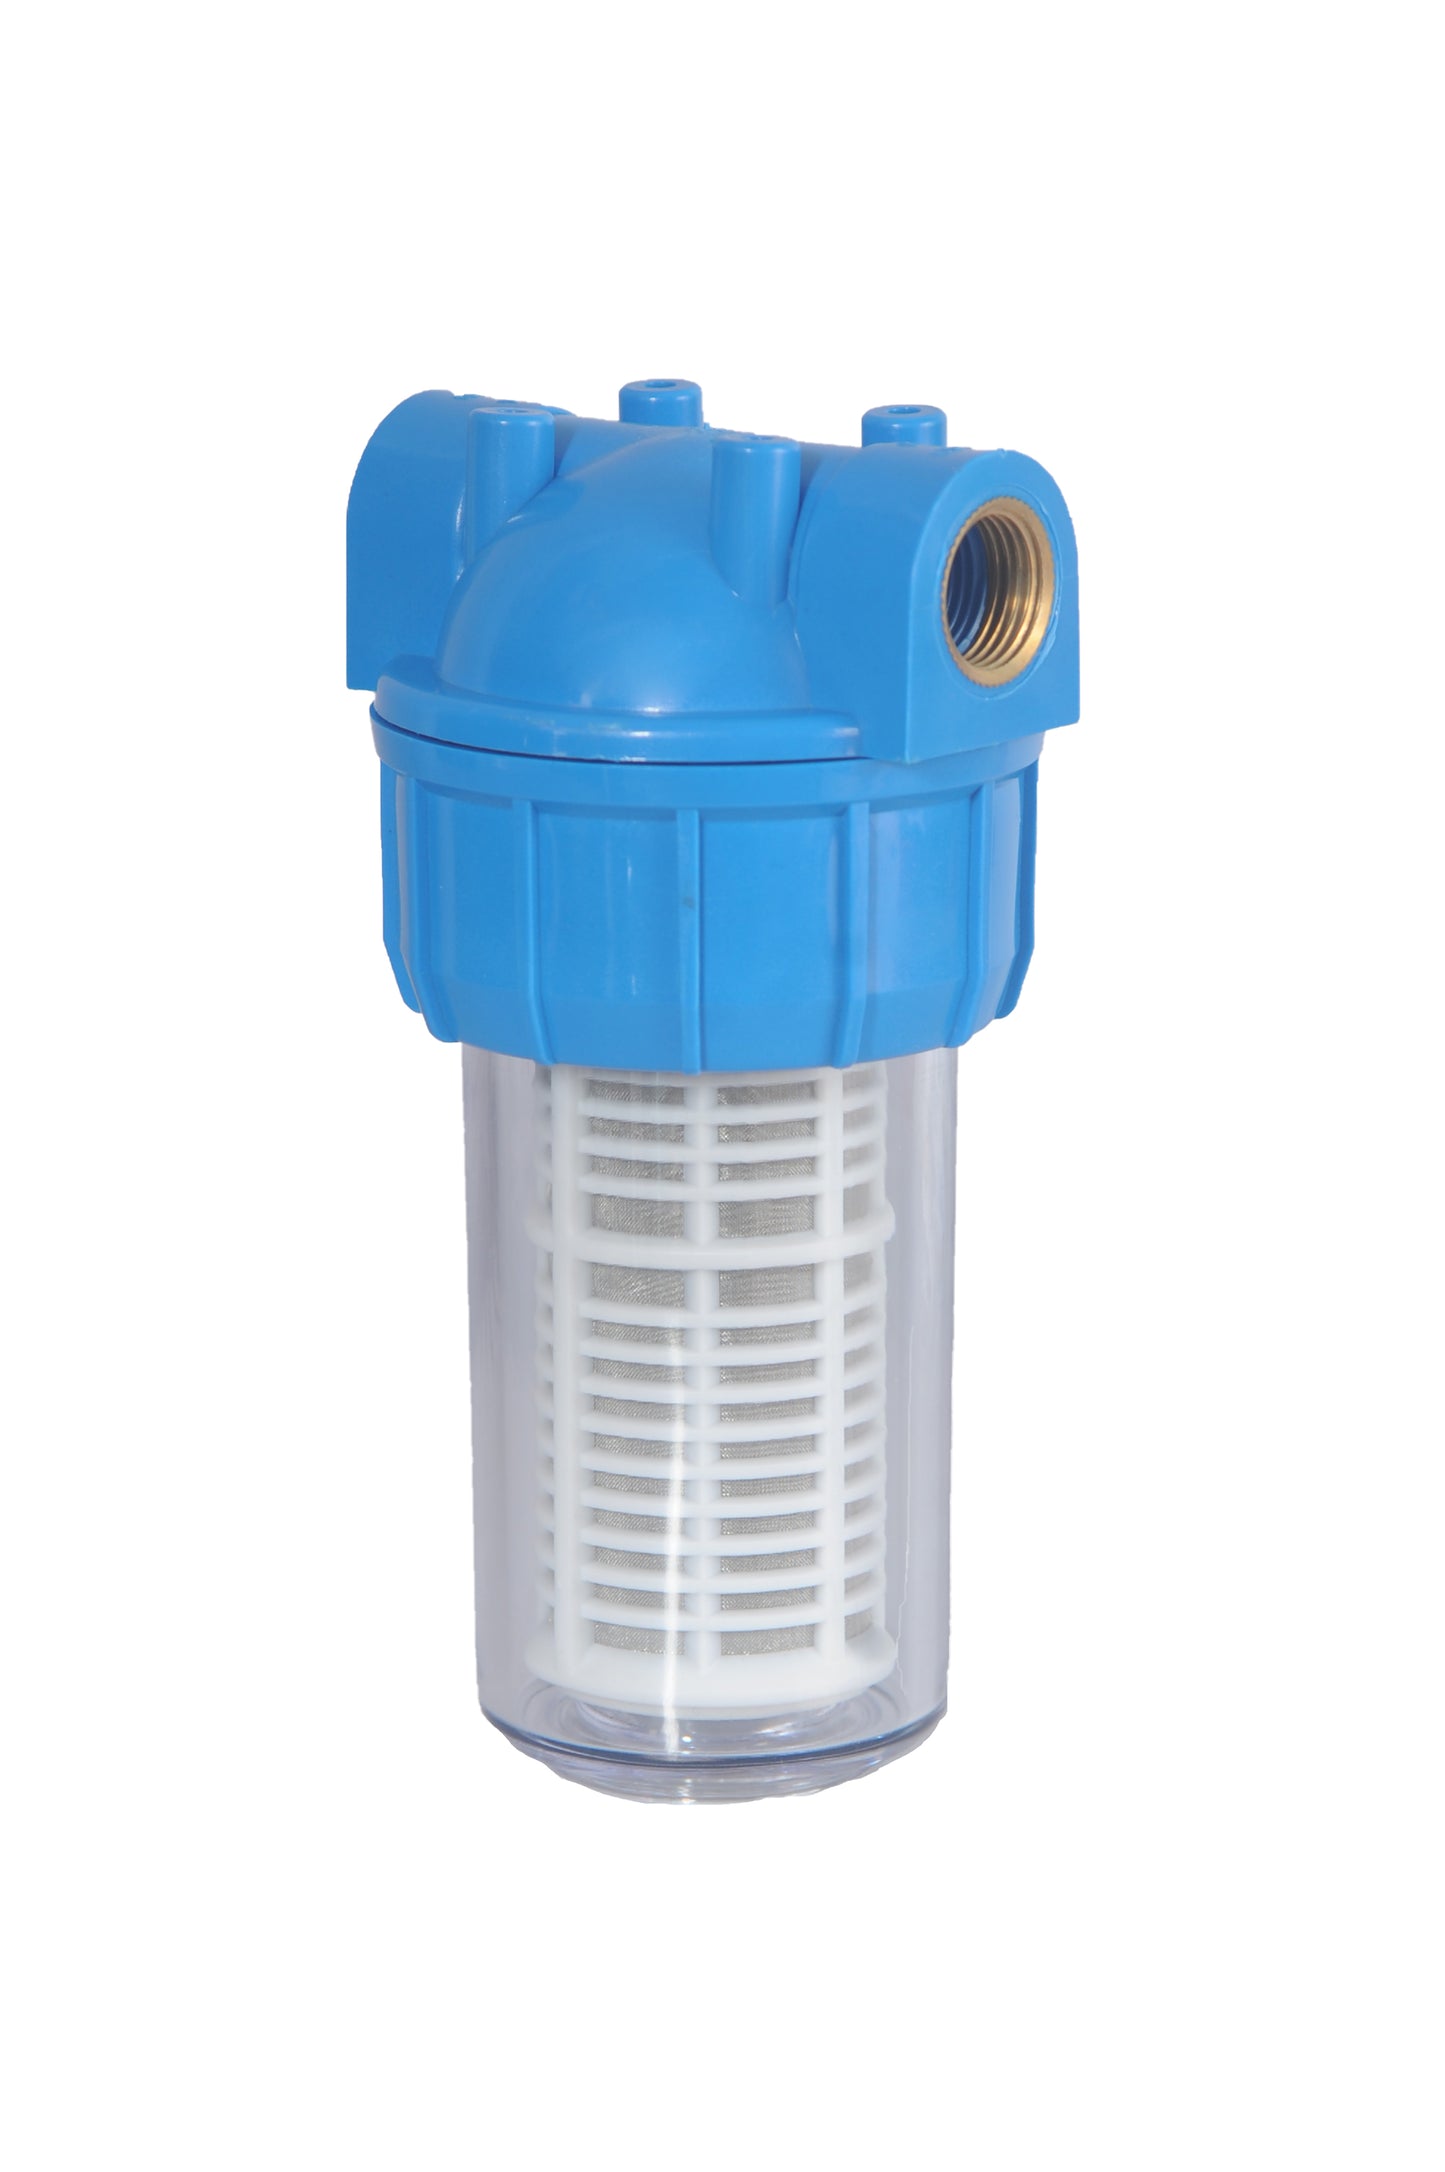 WF-100 washing machine filter for hard water | Protect from sediments and prevents limescale